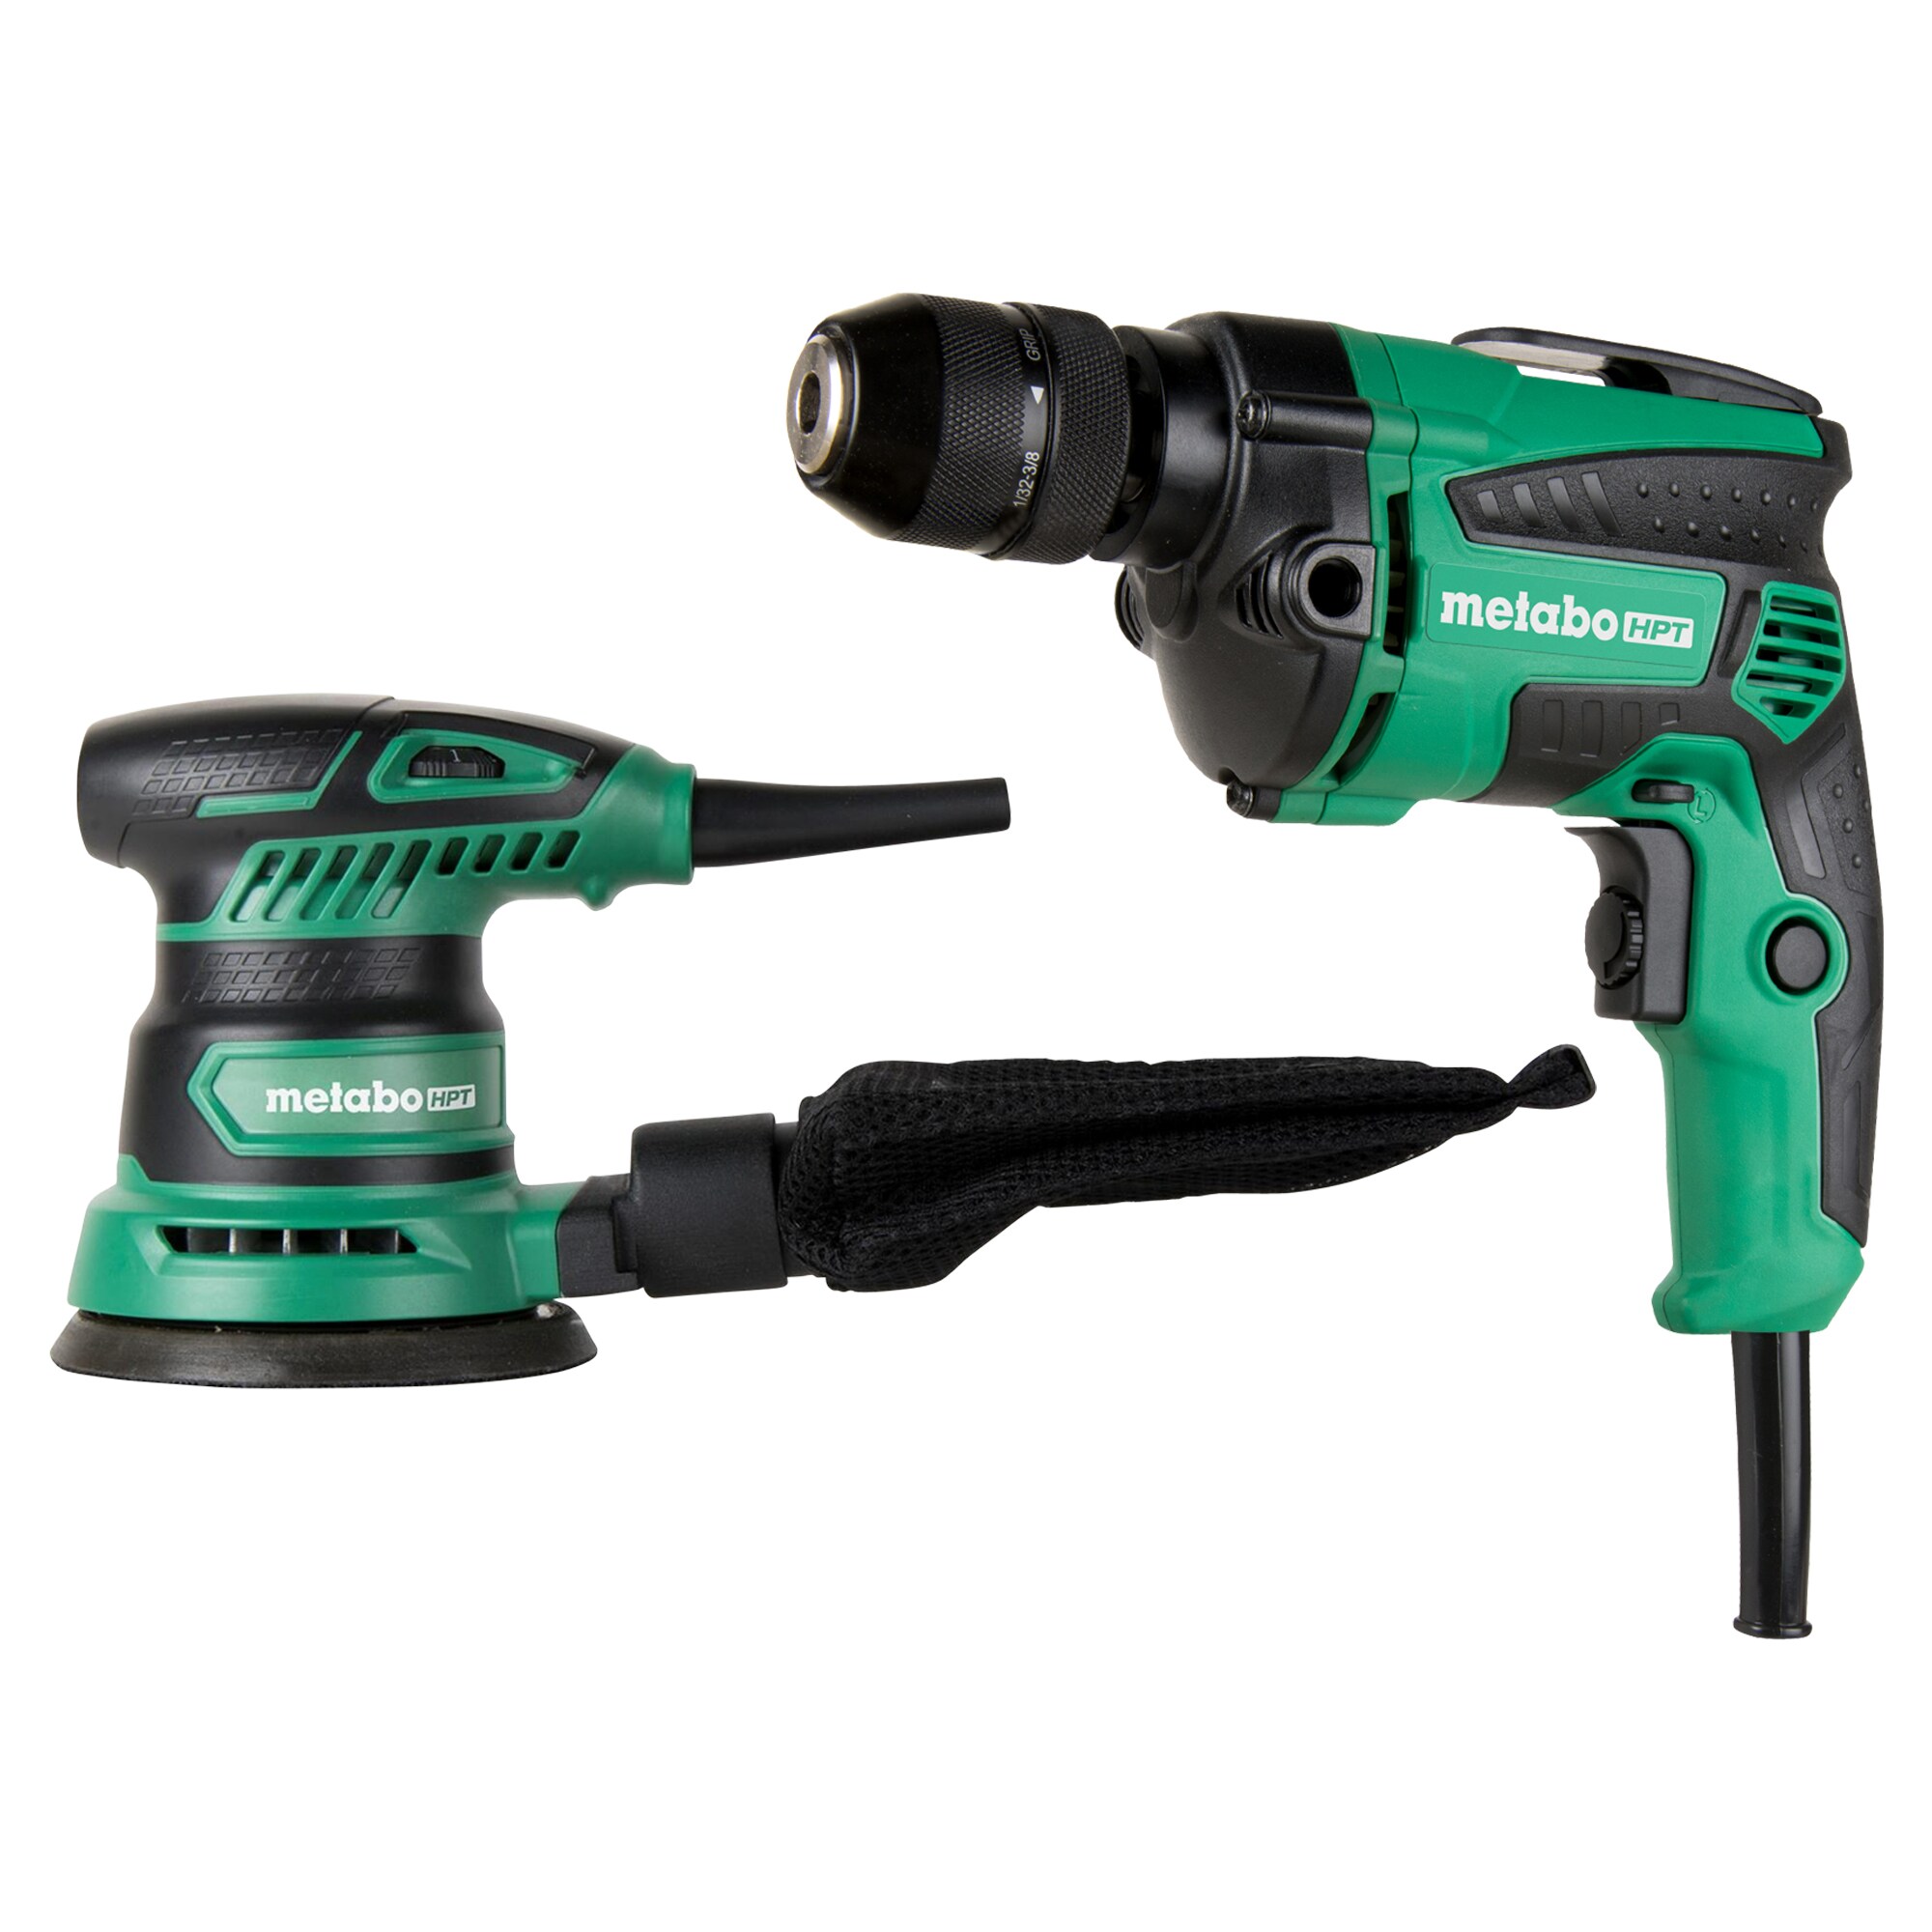 Metabo HPT 7 Amp Var Speed Drill with 11 Amp Recip Saw